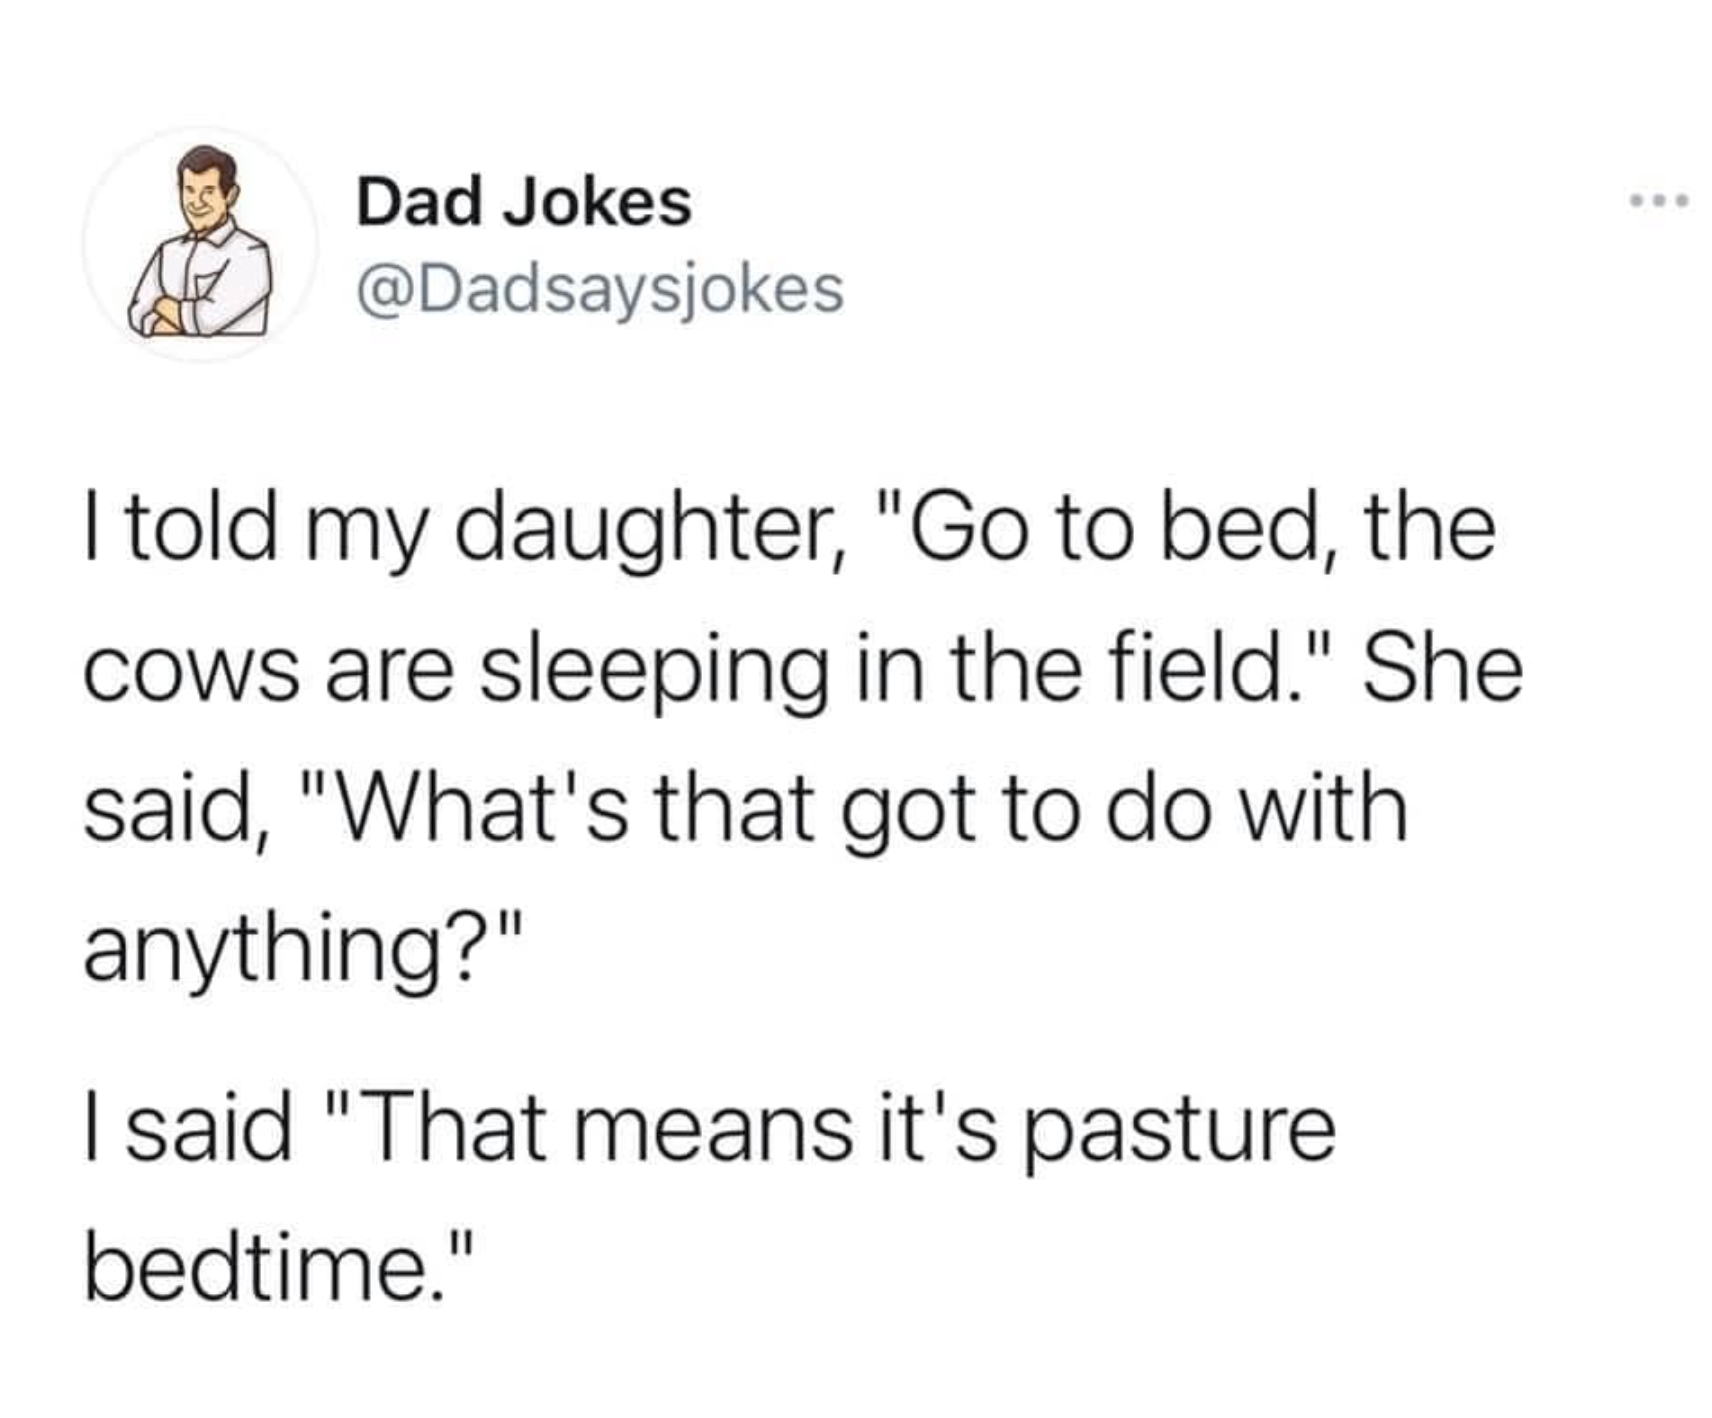 funny dad jokes - Dad Jokes I told my daughter, "Go to bed, the Cows are sleeping in the field." She said, "What's that got to do with anything?" I said "That means it's pasture bedtime."